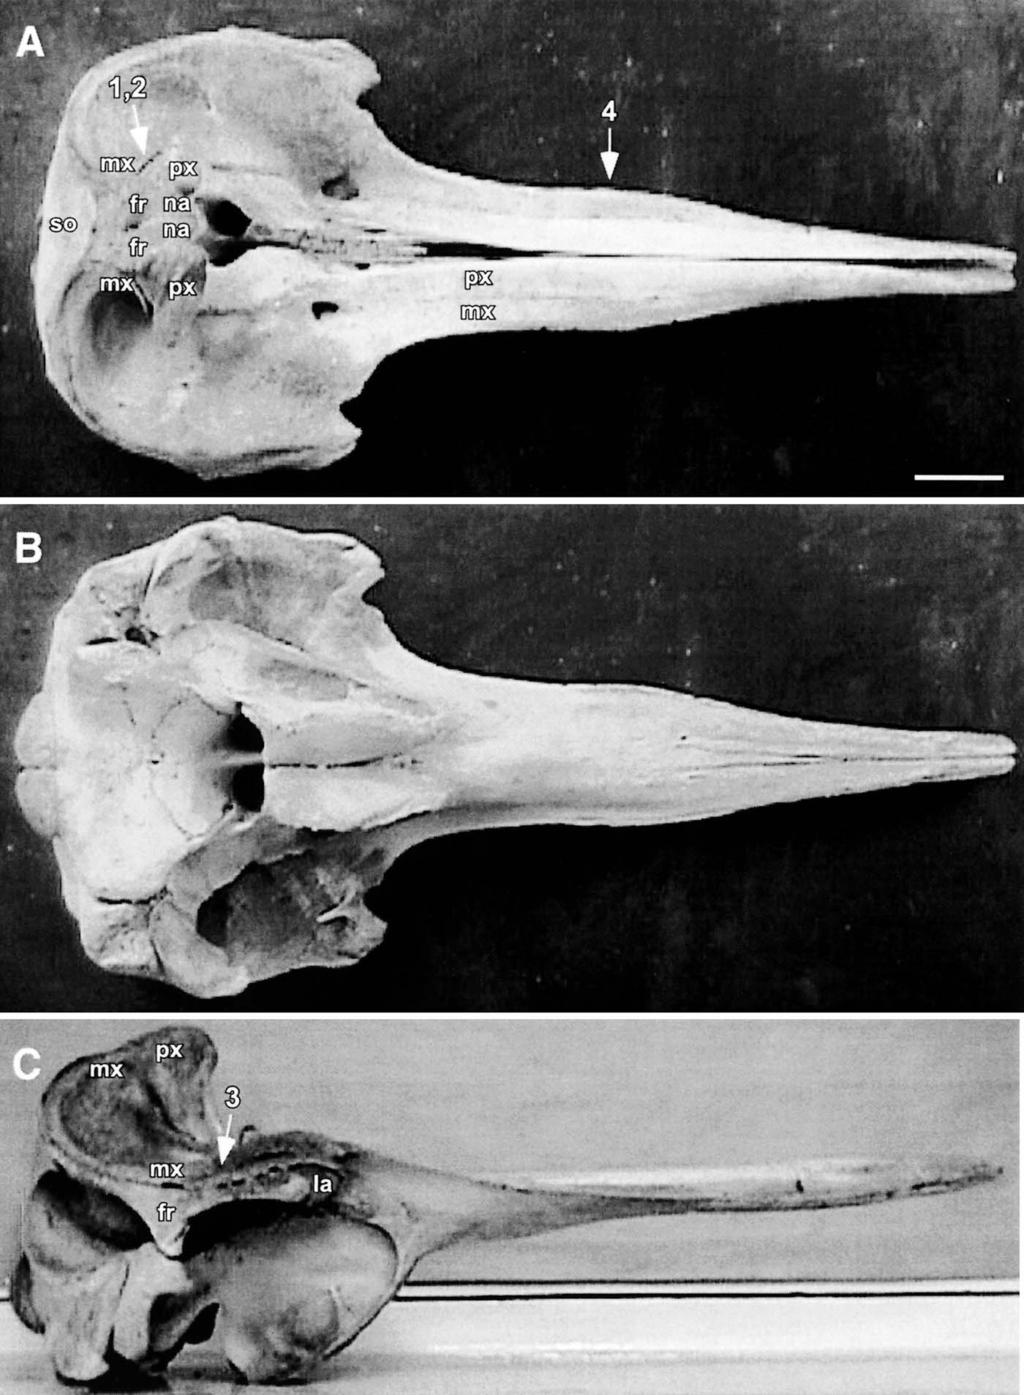 438 MARINE MAMMAL SCIENCE, VOL. 19, NO. 3, 2003 Figure 6. Skulls of mature Longman s beaked whales; OM7622, Kenya: (A) dorsal view; (B) ventral view; (C) lateral view (scale bar 5 10 cm, images A C).